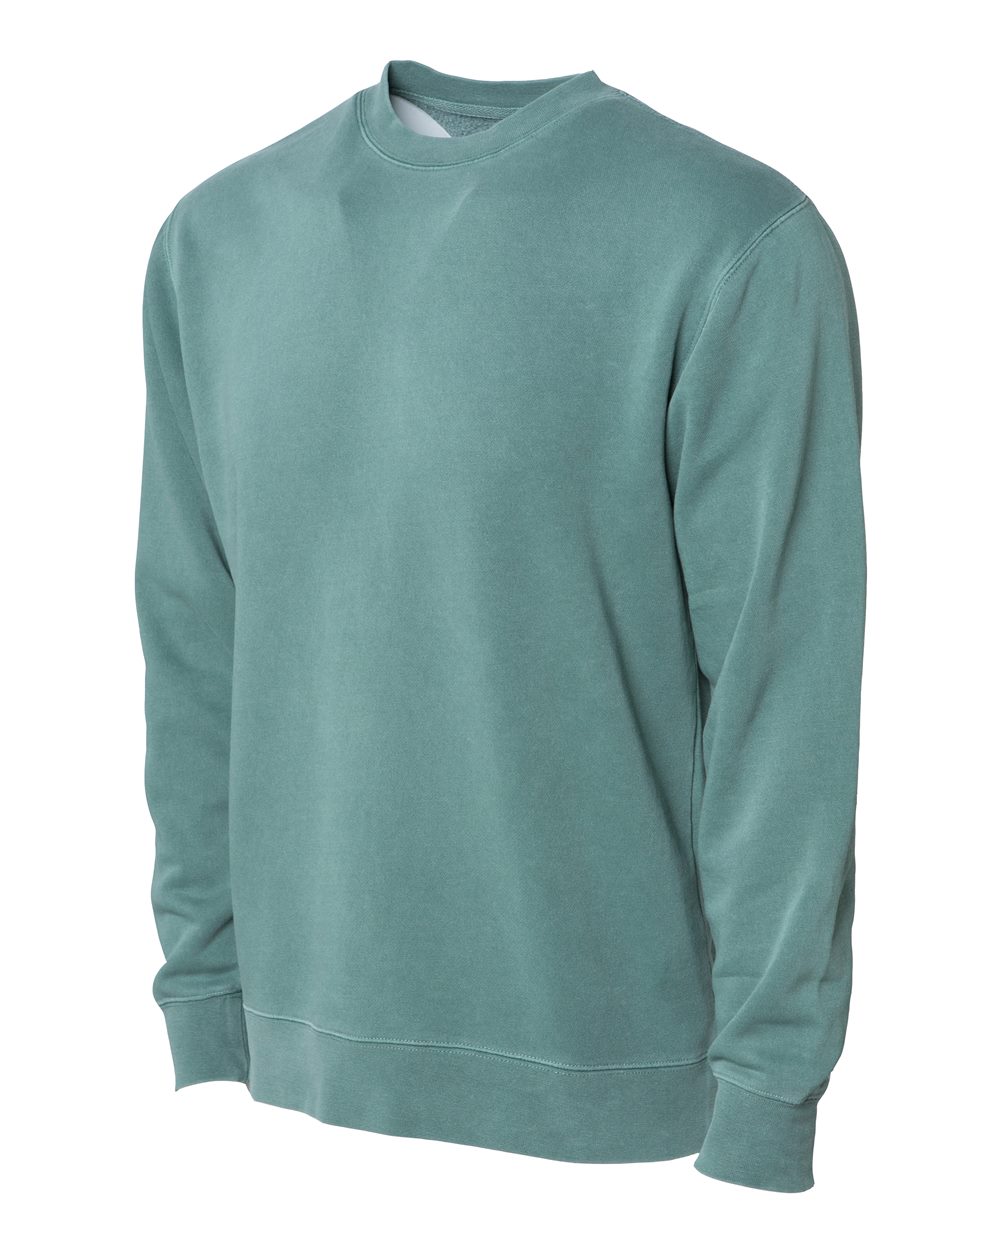 Independent Trading Co. PRM3500 Unisex Pigment Dyed Crew Neck